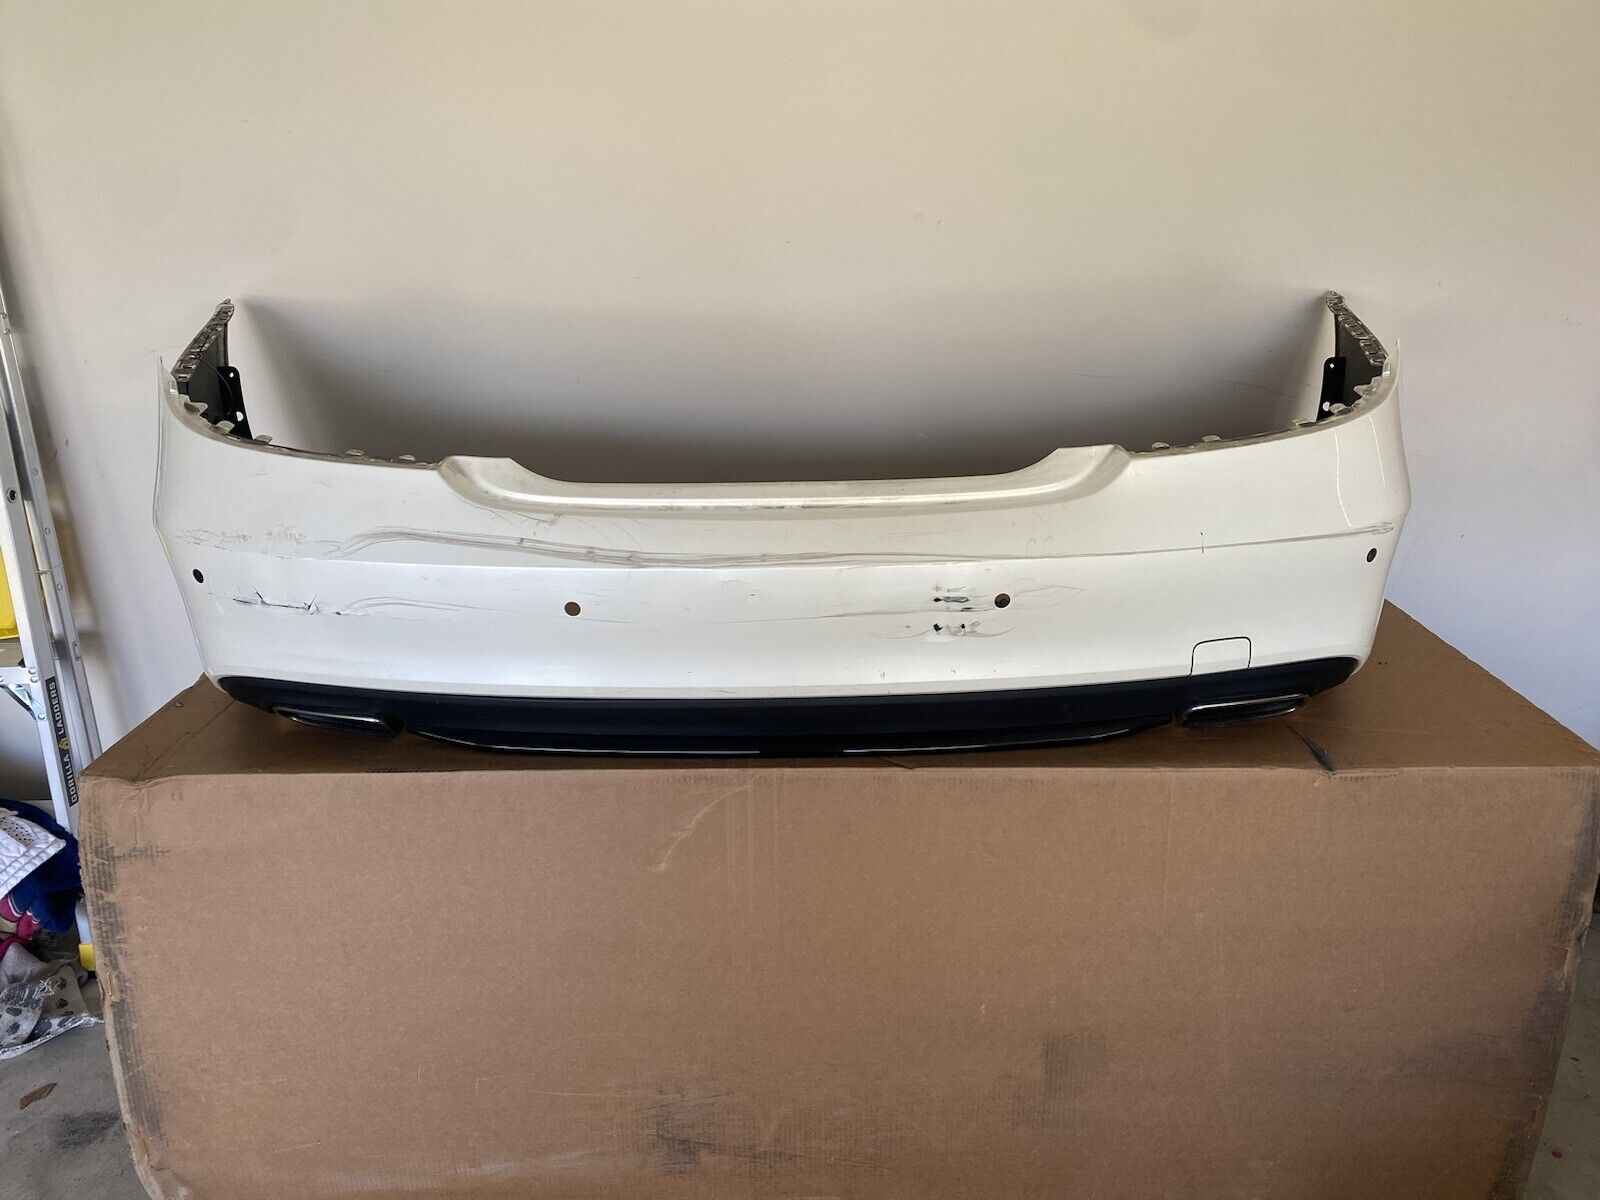 2017 Mercedes Benz  CLS550 Rear Bumper Cover Assembly  White OEM AMG